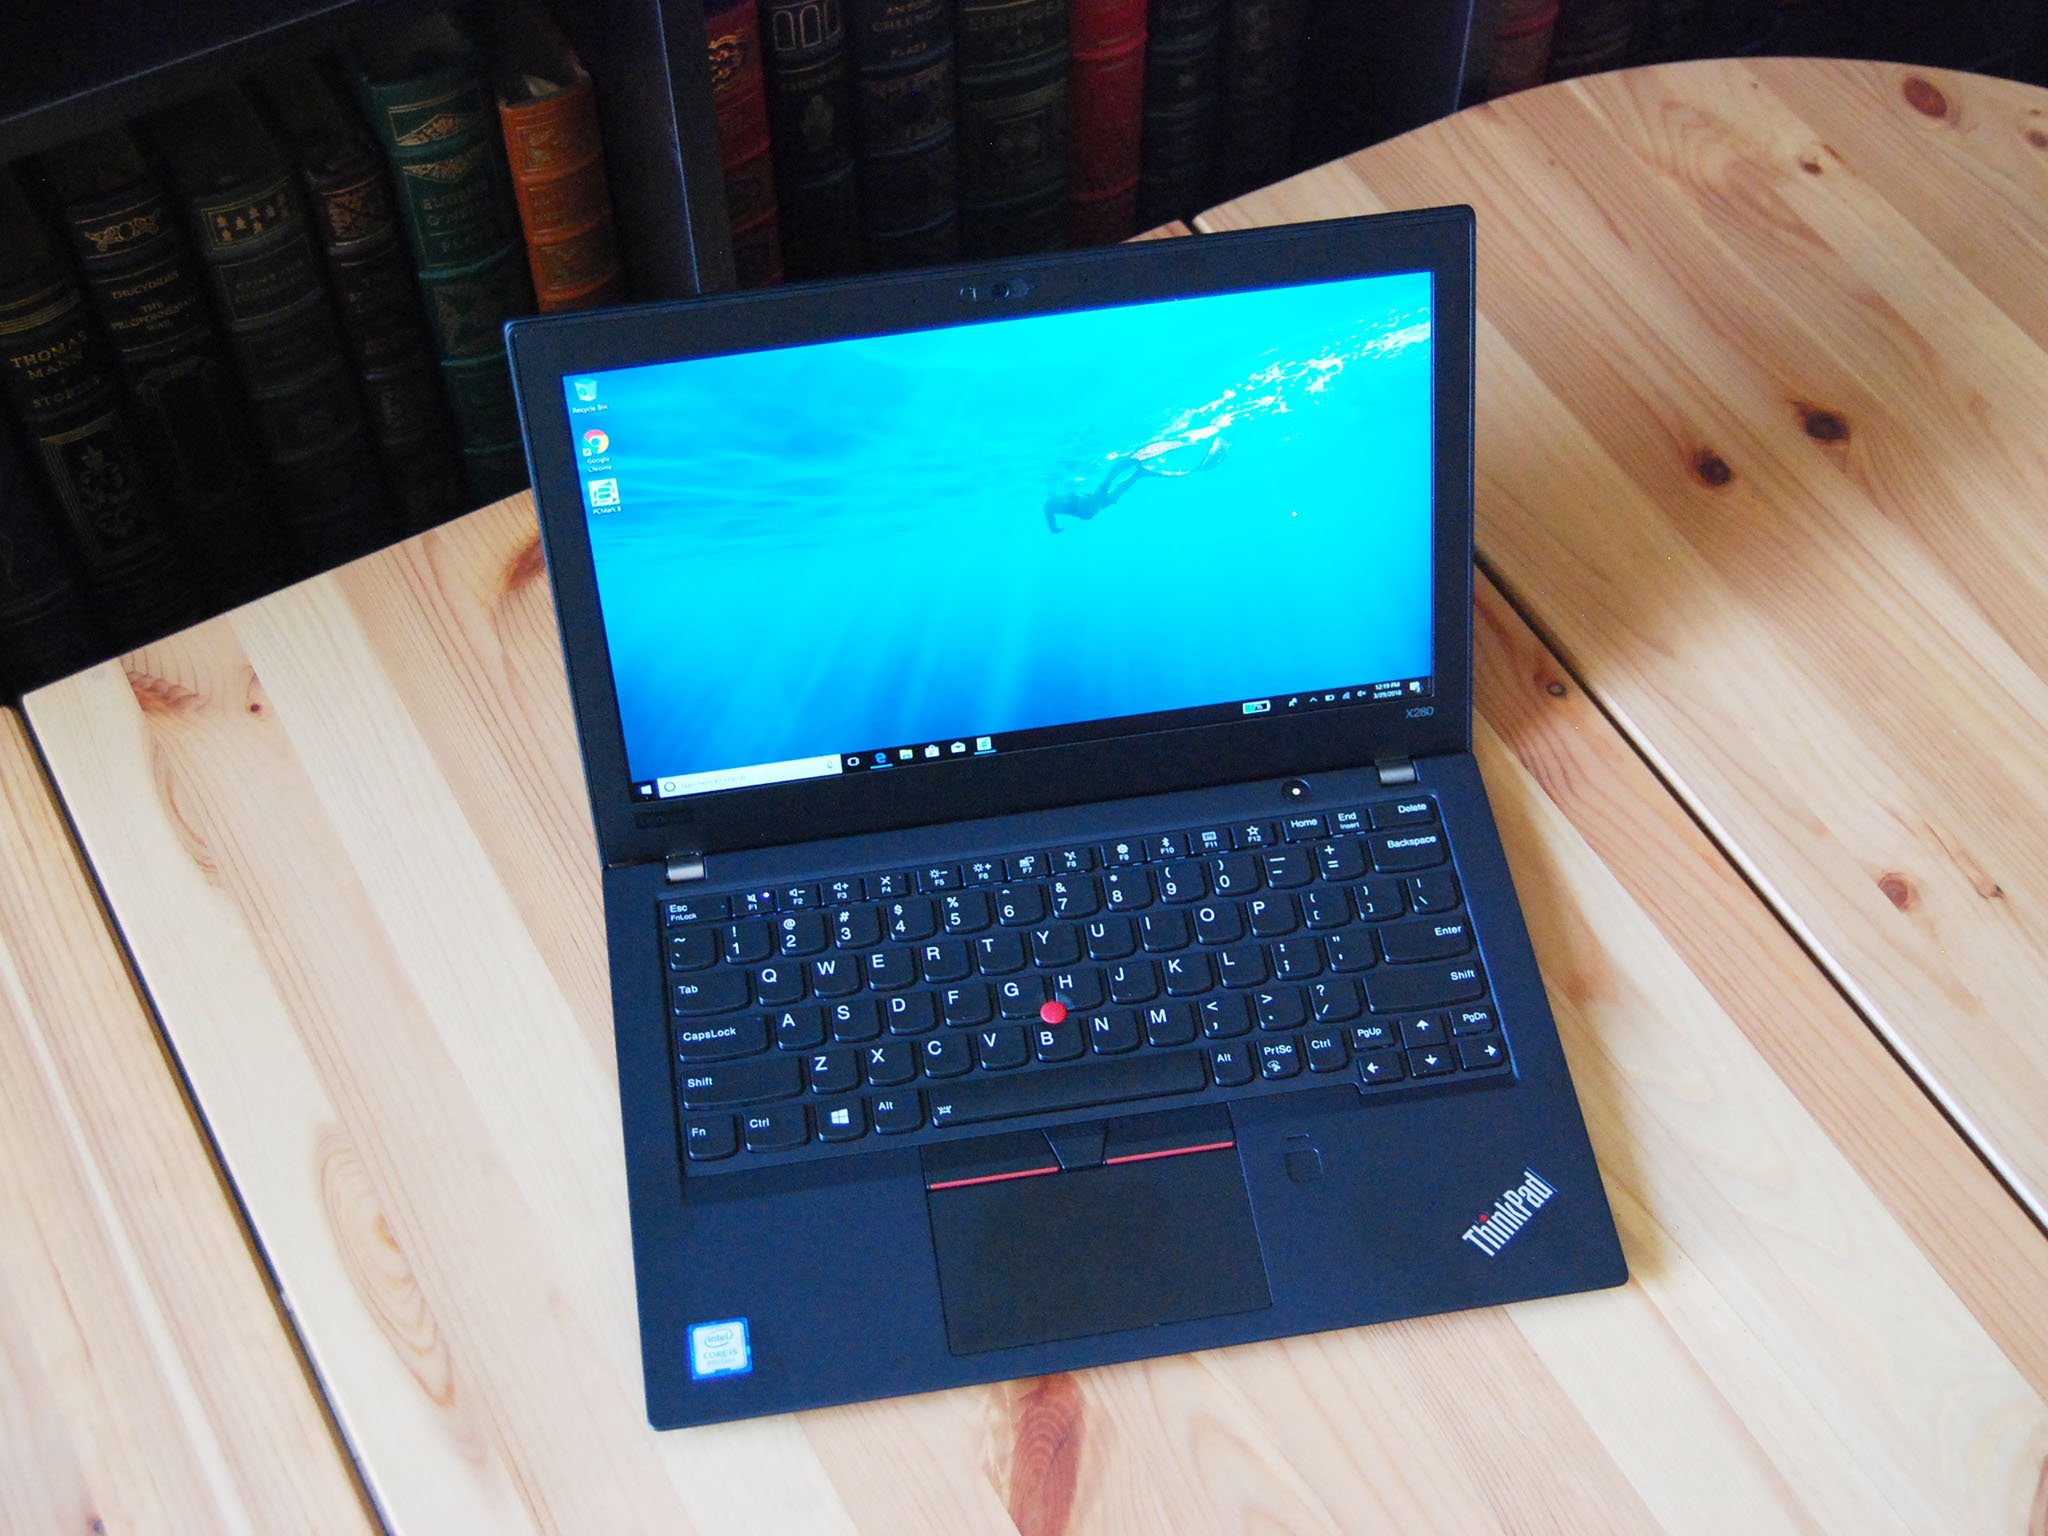 Lenovo ThinkPad X280 Review: Thinner & lighter, but less features